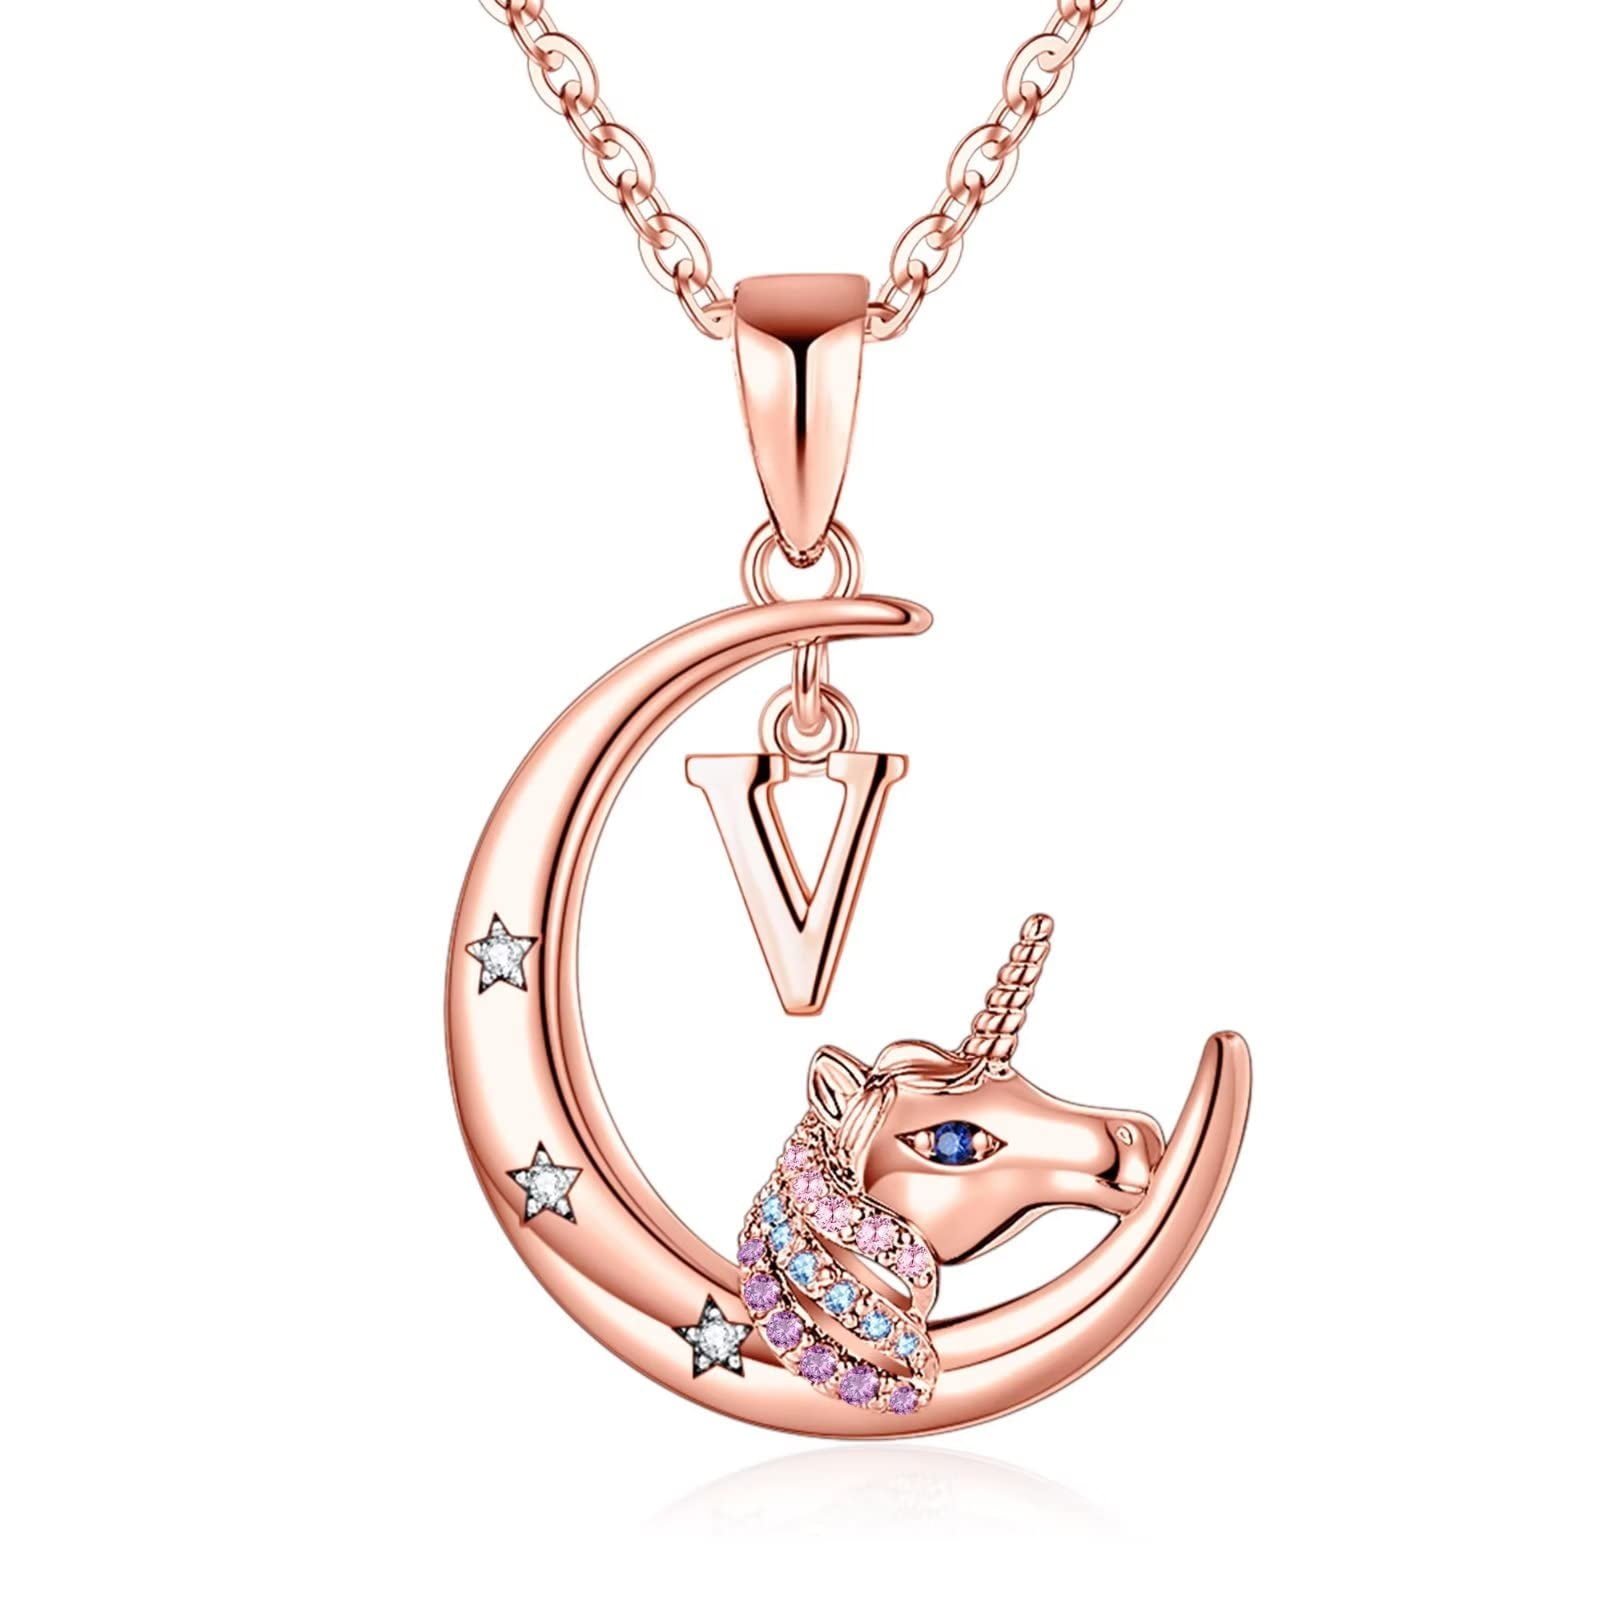  GULICX Unicorns Gifts for Girls, Heart Pendant Unicorn Necklace  for Girls Jewelry Birthday for Daughter Granddaughter Niece: Clothing,  Shoes & Jewelry